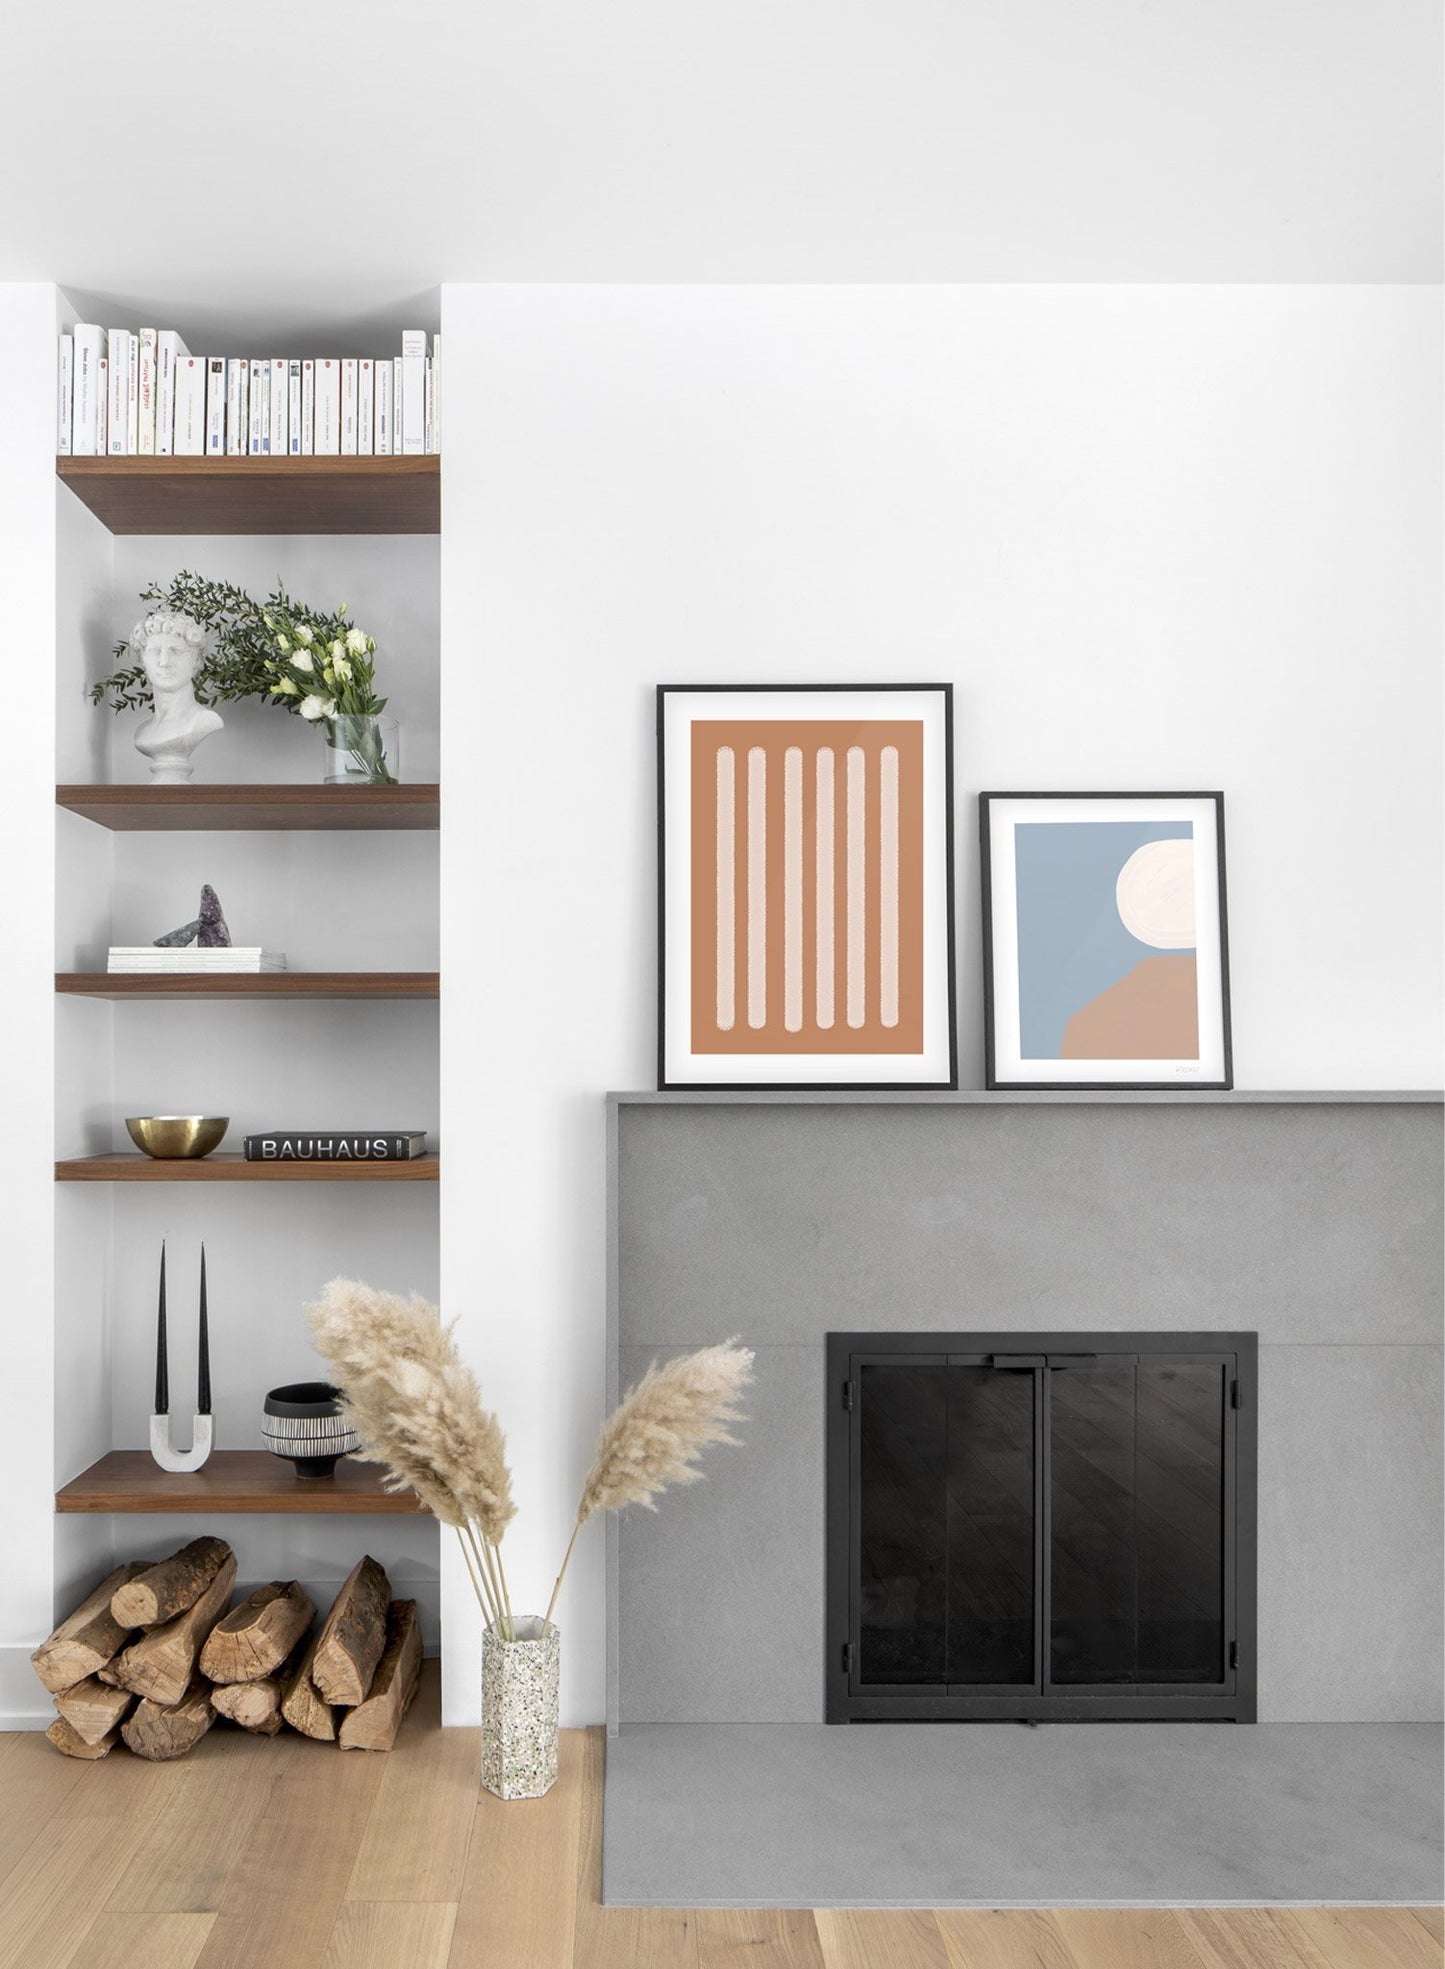 Modern minimalist poster by Opposite Wall with abstract illustration of Two-Toned in Burnt Orange - Gallery wall duo - Fireplace